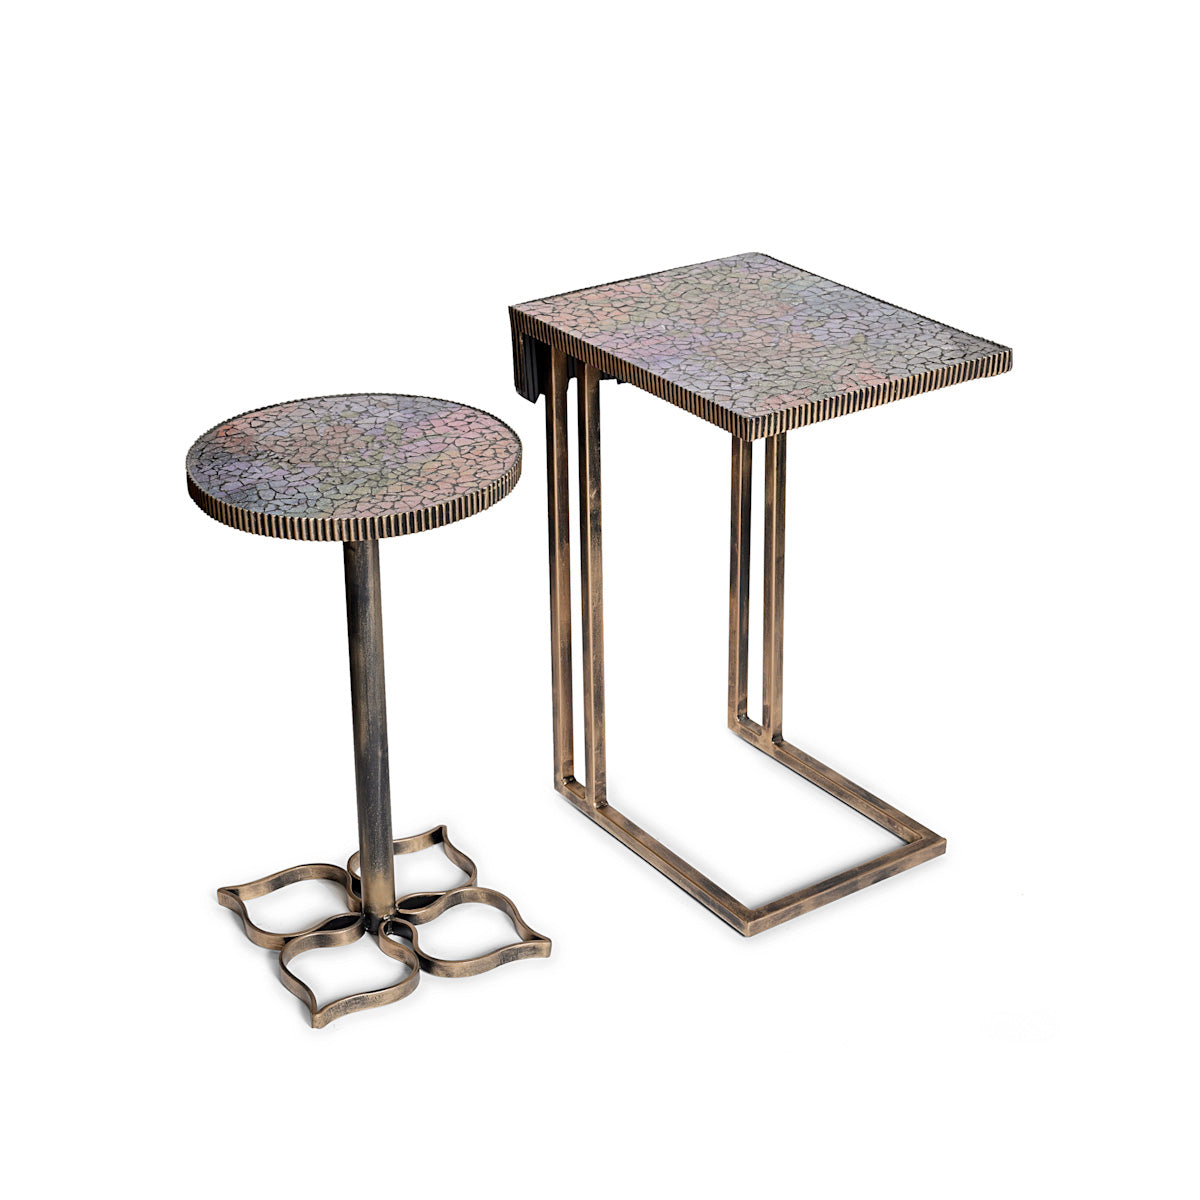 Mosaic Eclectic C Table